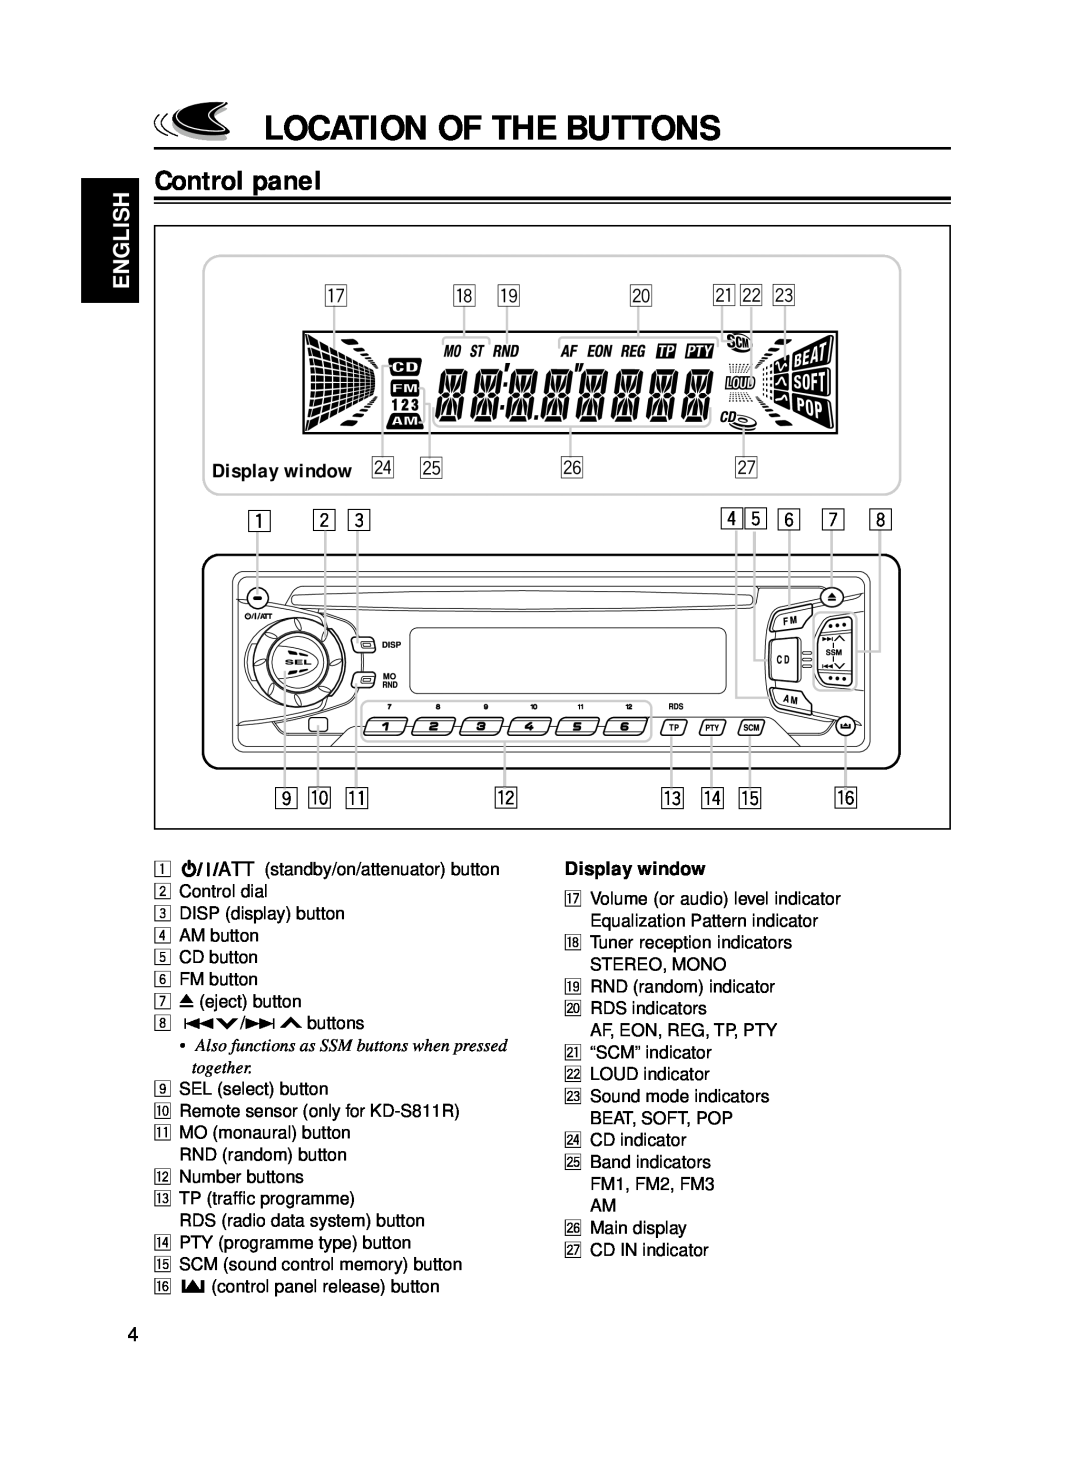 JVC KD-S713R, KD-S711R manual Location Of The Buttons, Control panel 